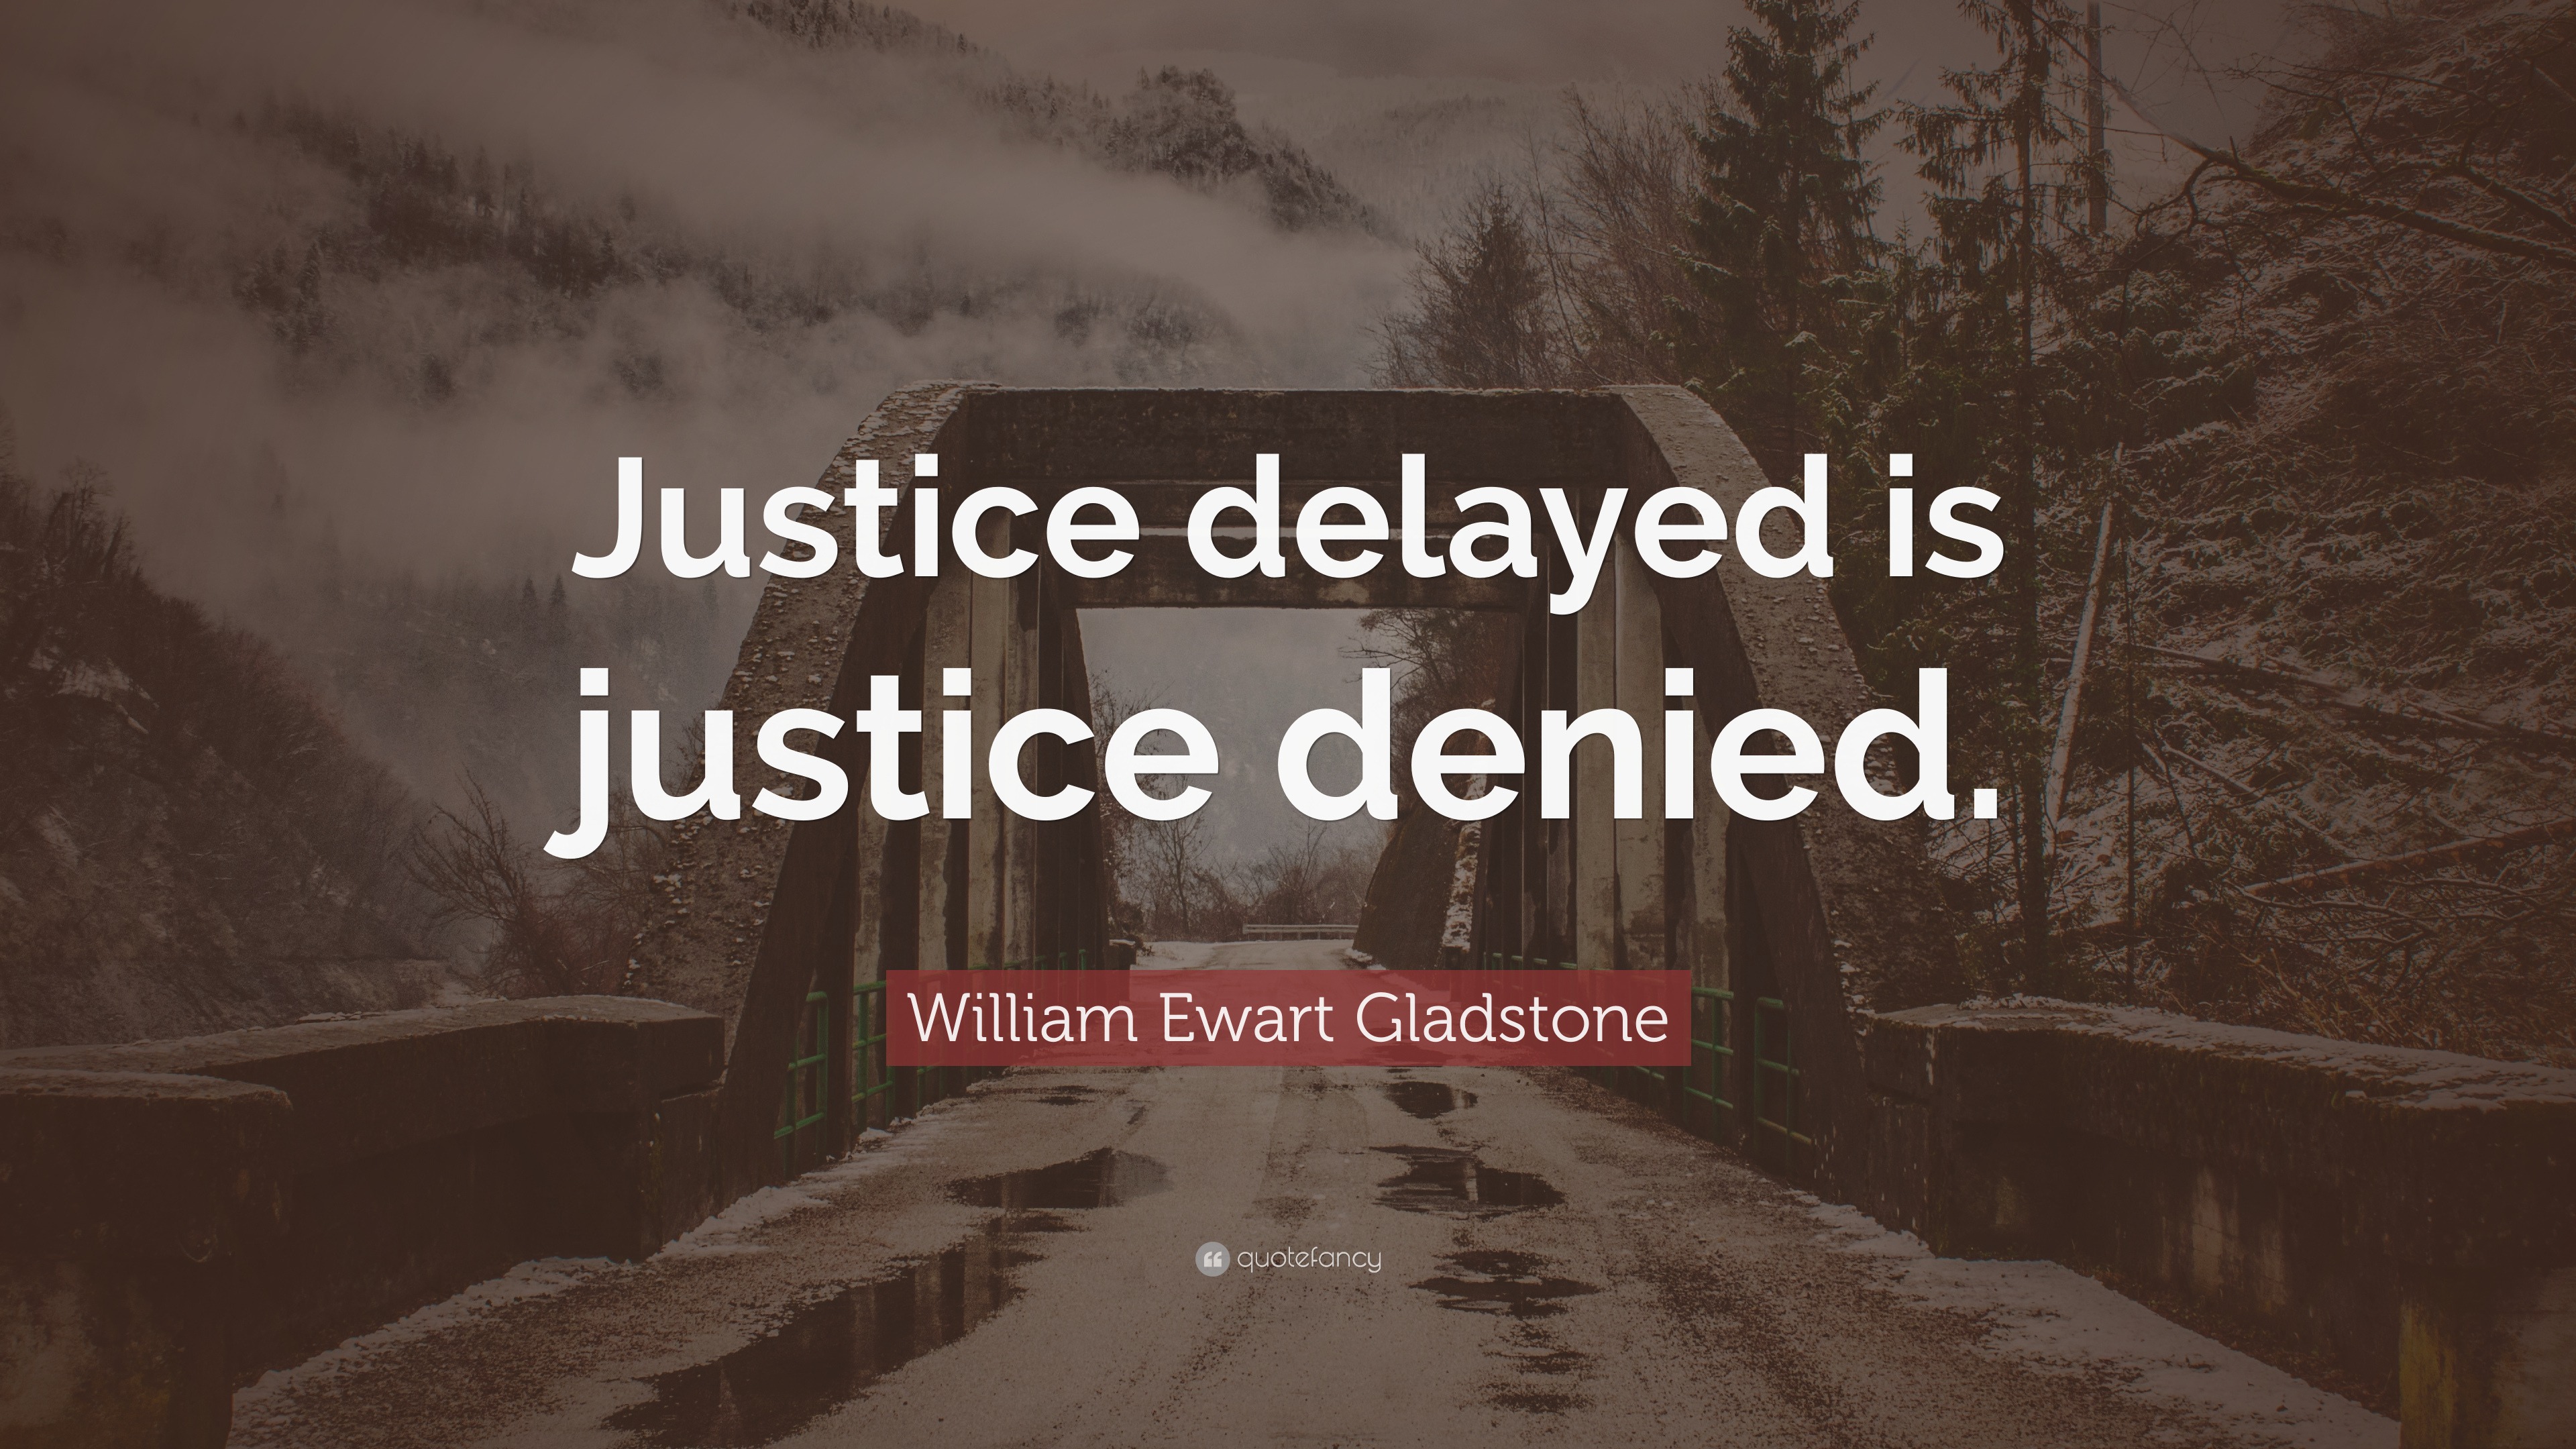 essay on justice delayed is justice denied